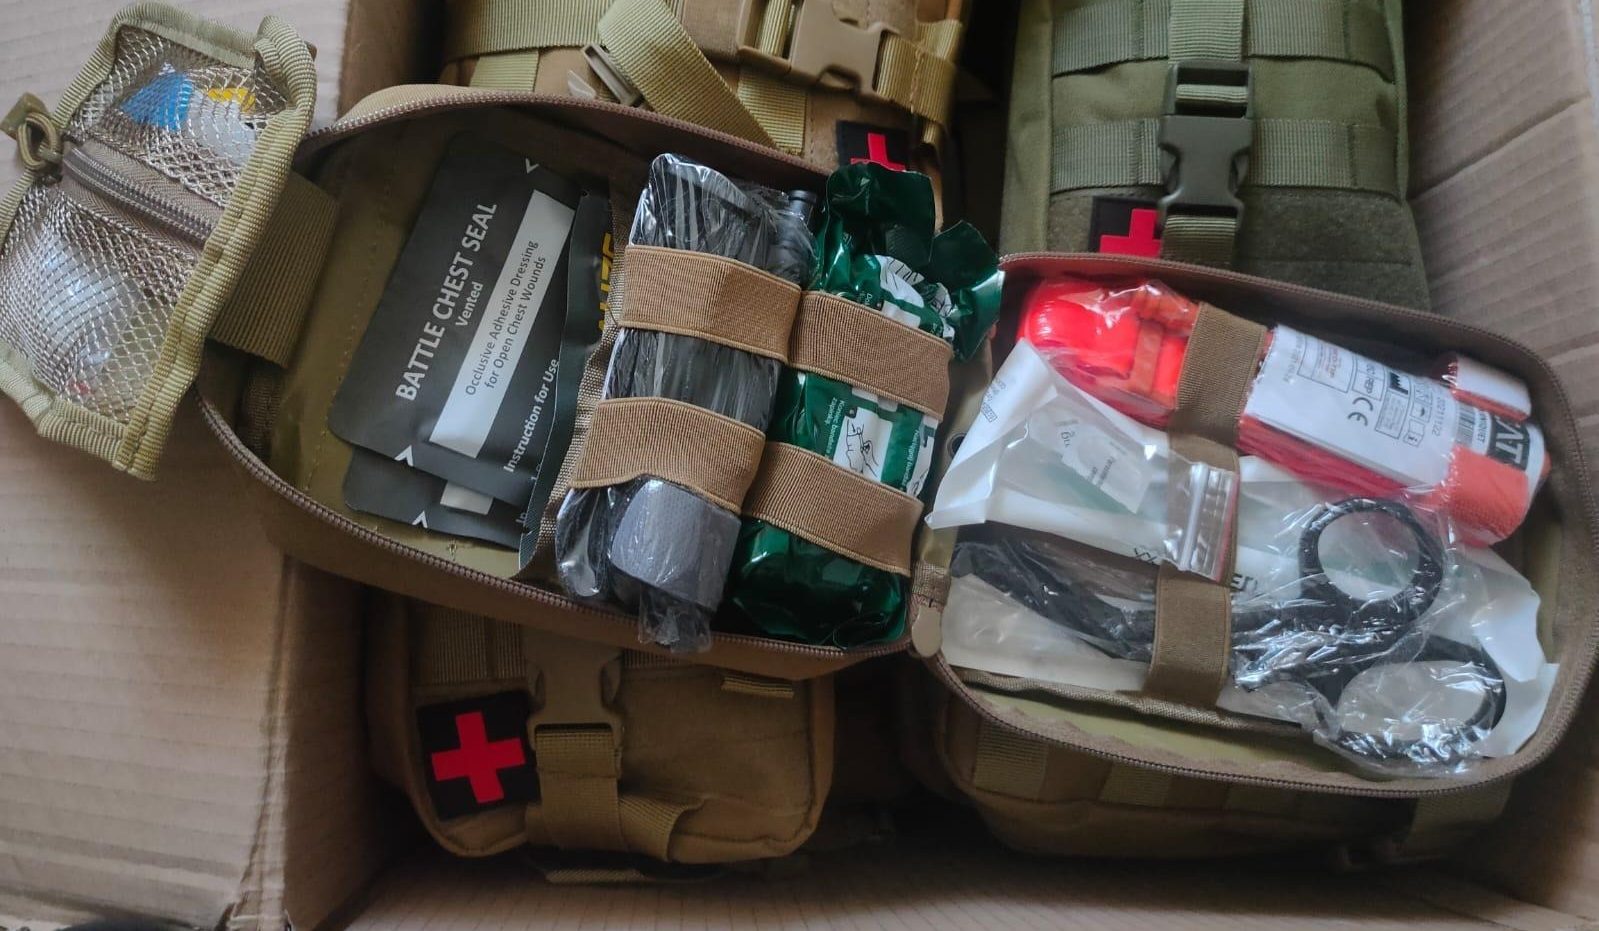 Together with Solanus GmbH, provided first-aid kits for Scouts-defenders